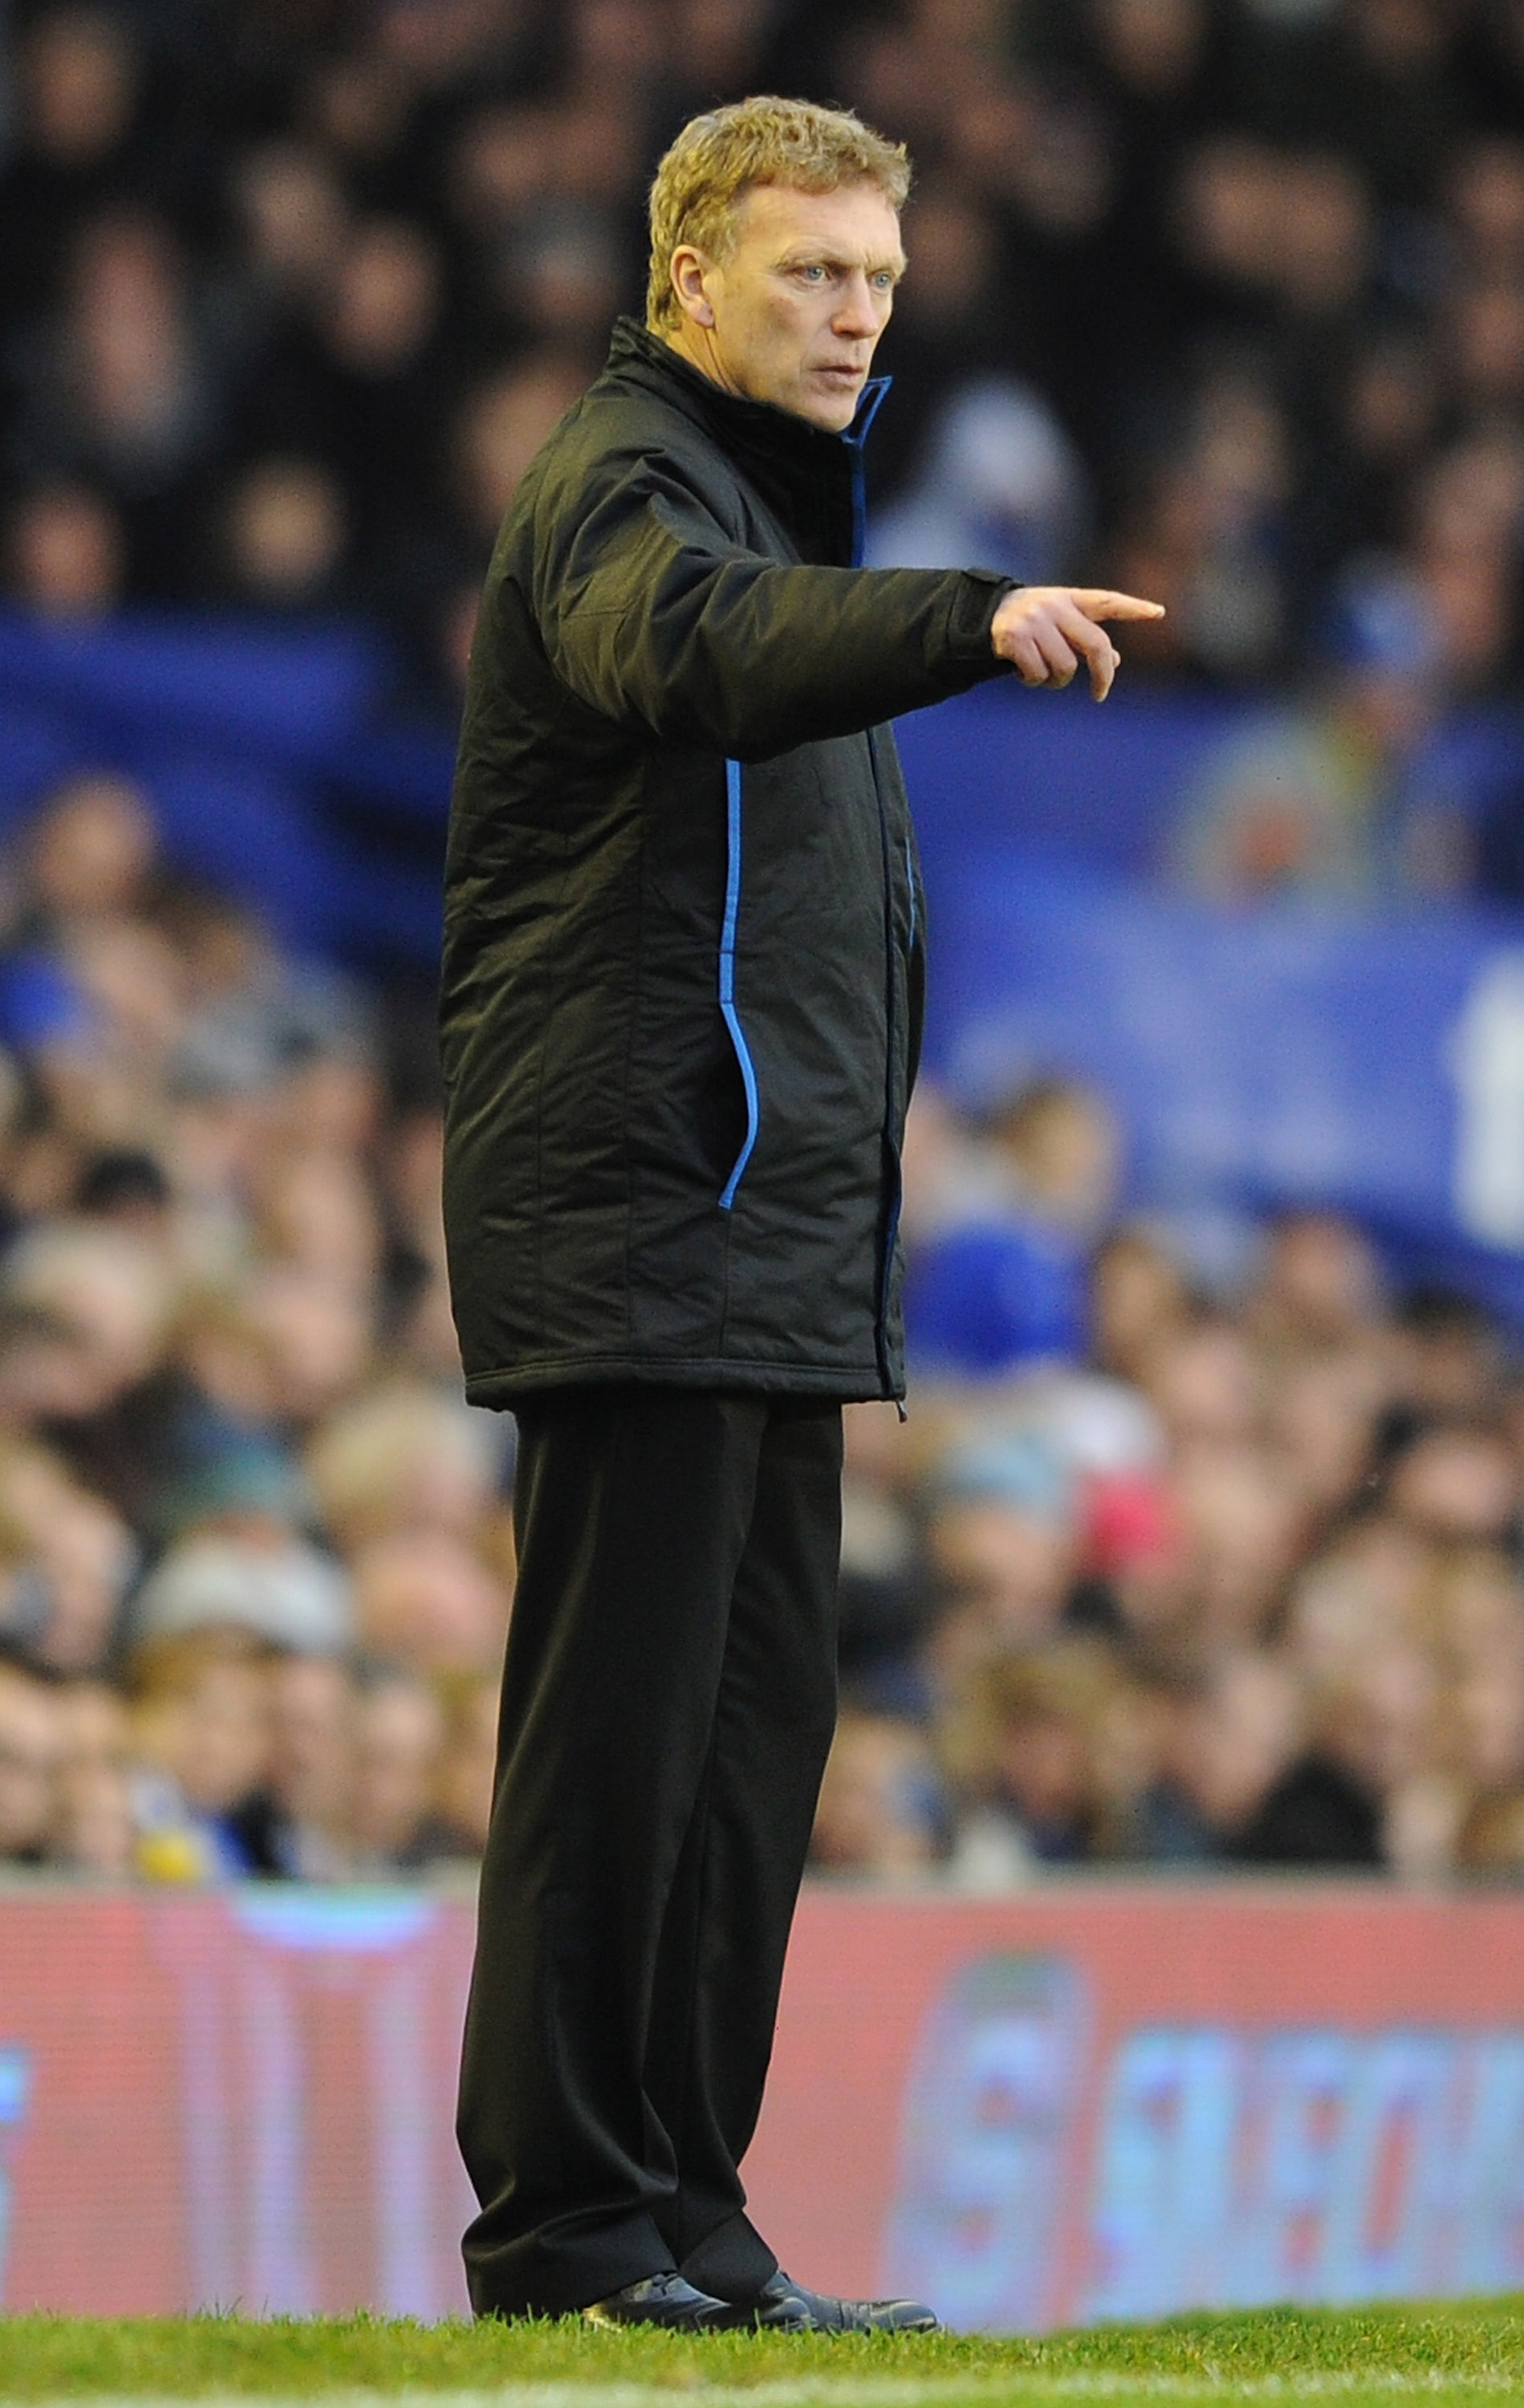 LIVERPOOL, ENGLAND - DECEMBER 11:  Everton manager David Moyes gestures from the touchline during the Barclays Premier League match between Everton and Wigan Athletic at Goodison Park on December 11, 2010 in Liverpool, England.  (Photo by Chris Brunskill/